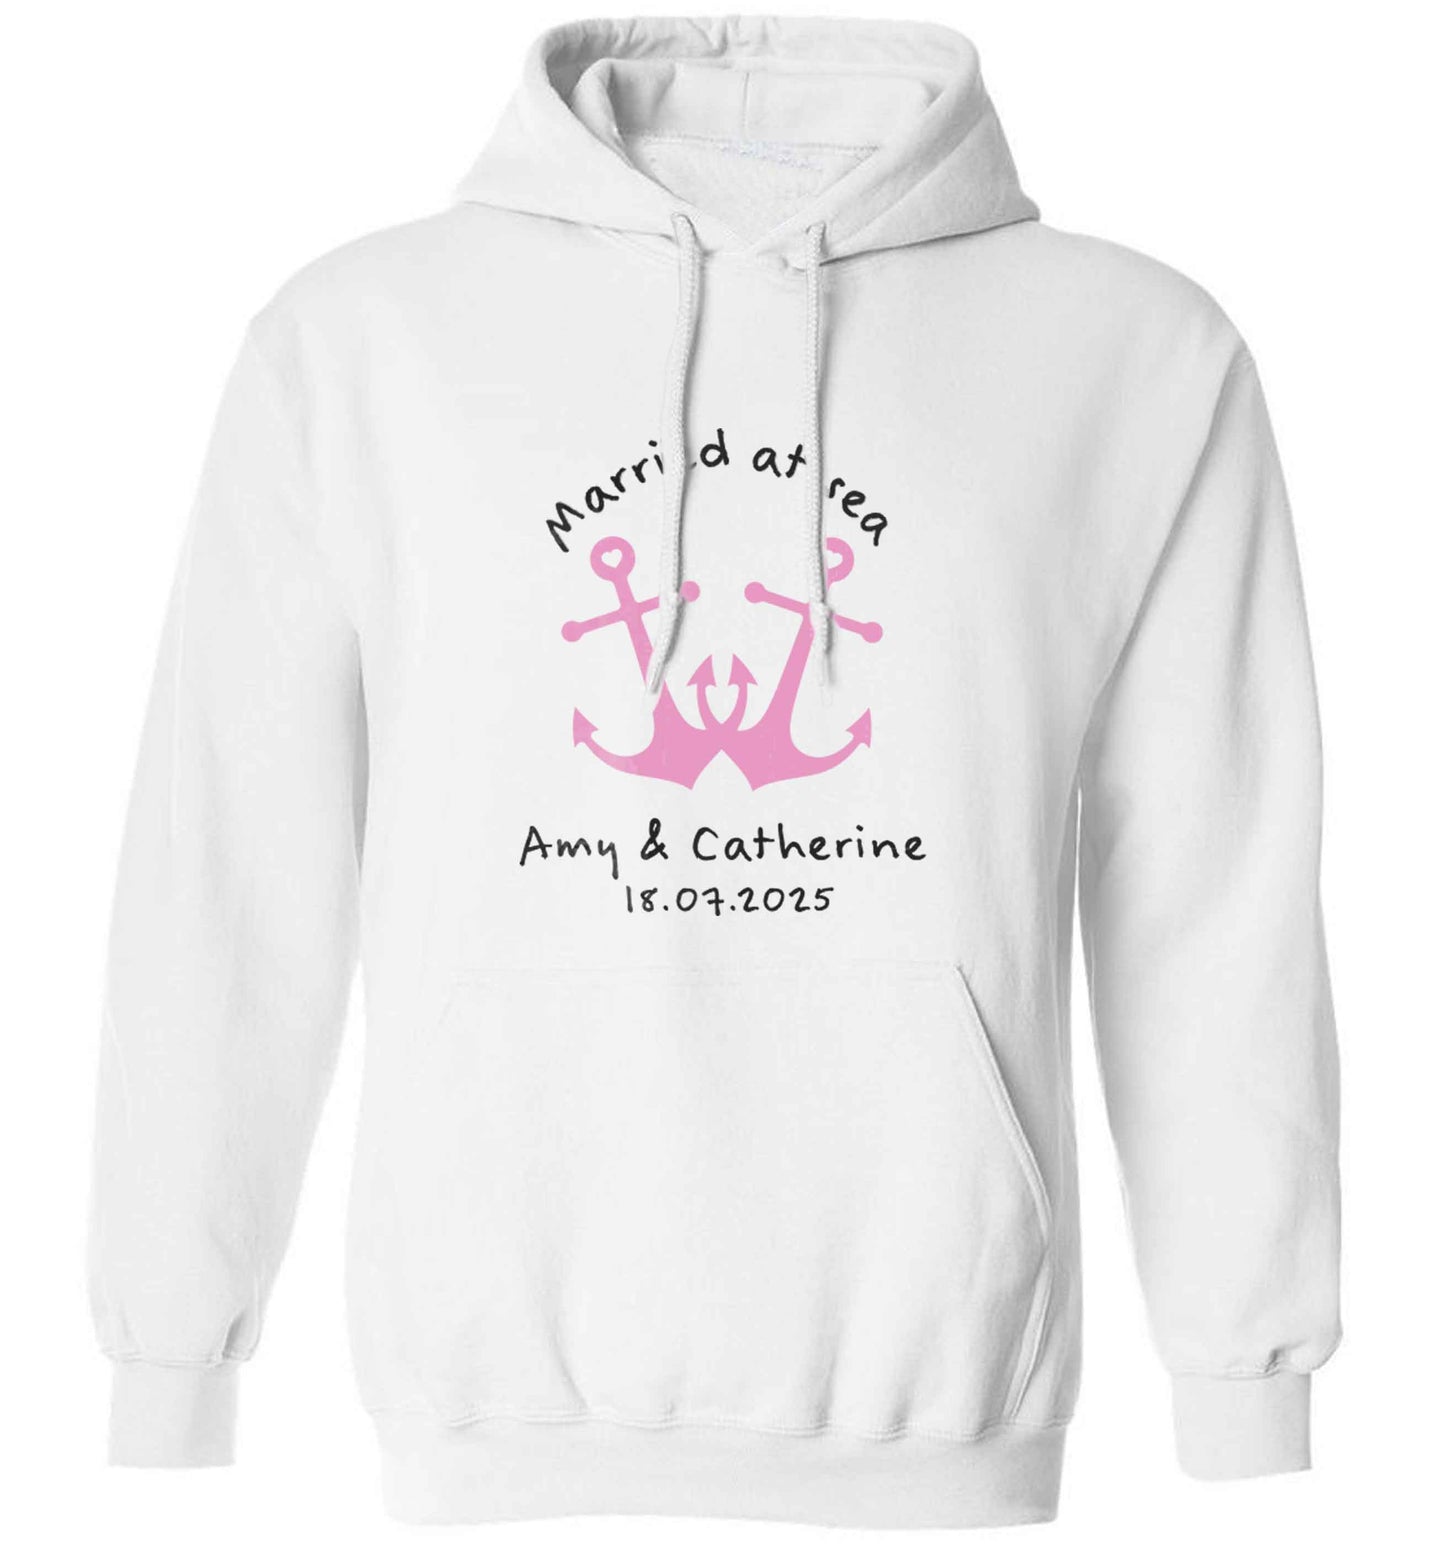 Married at sea pink anchors adults unisex white hoodie 2XL